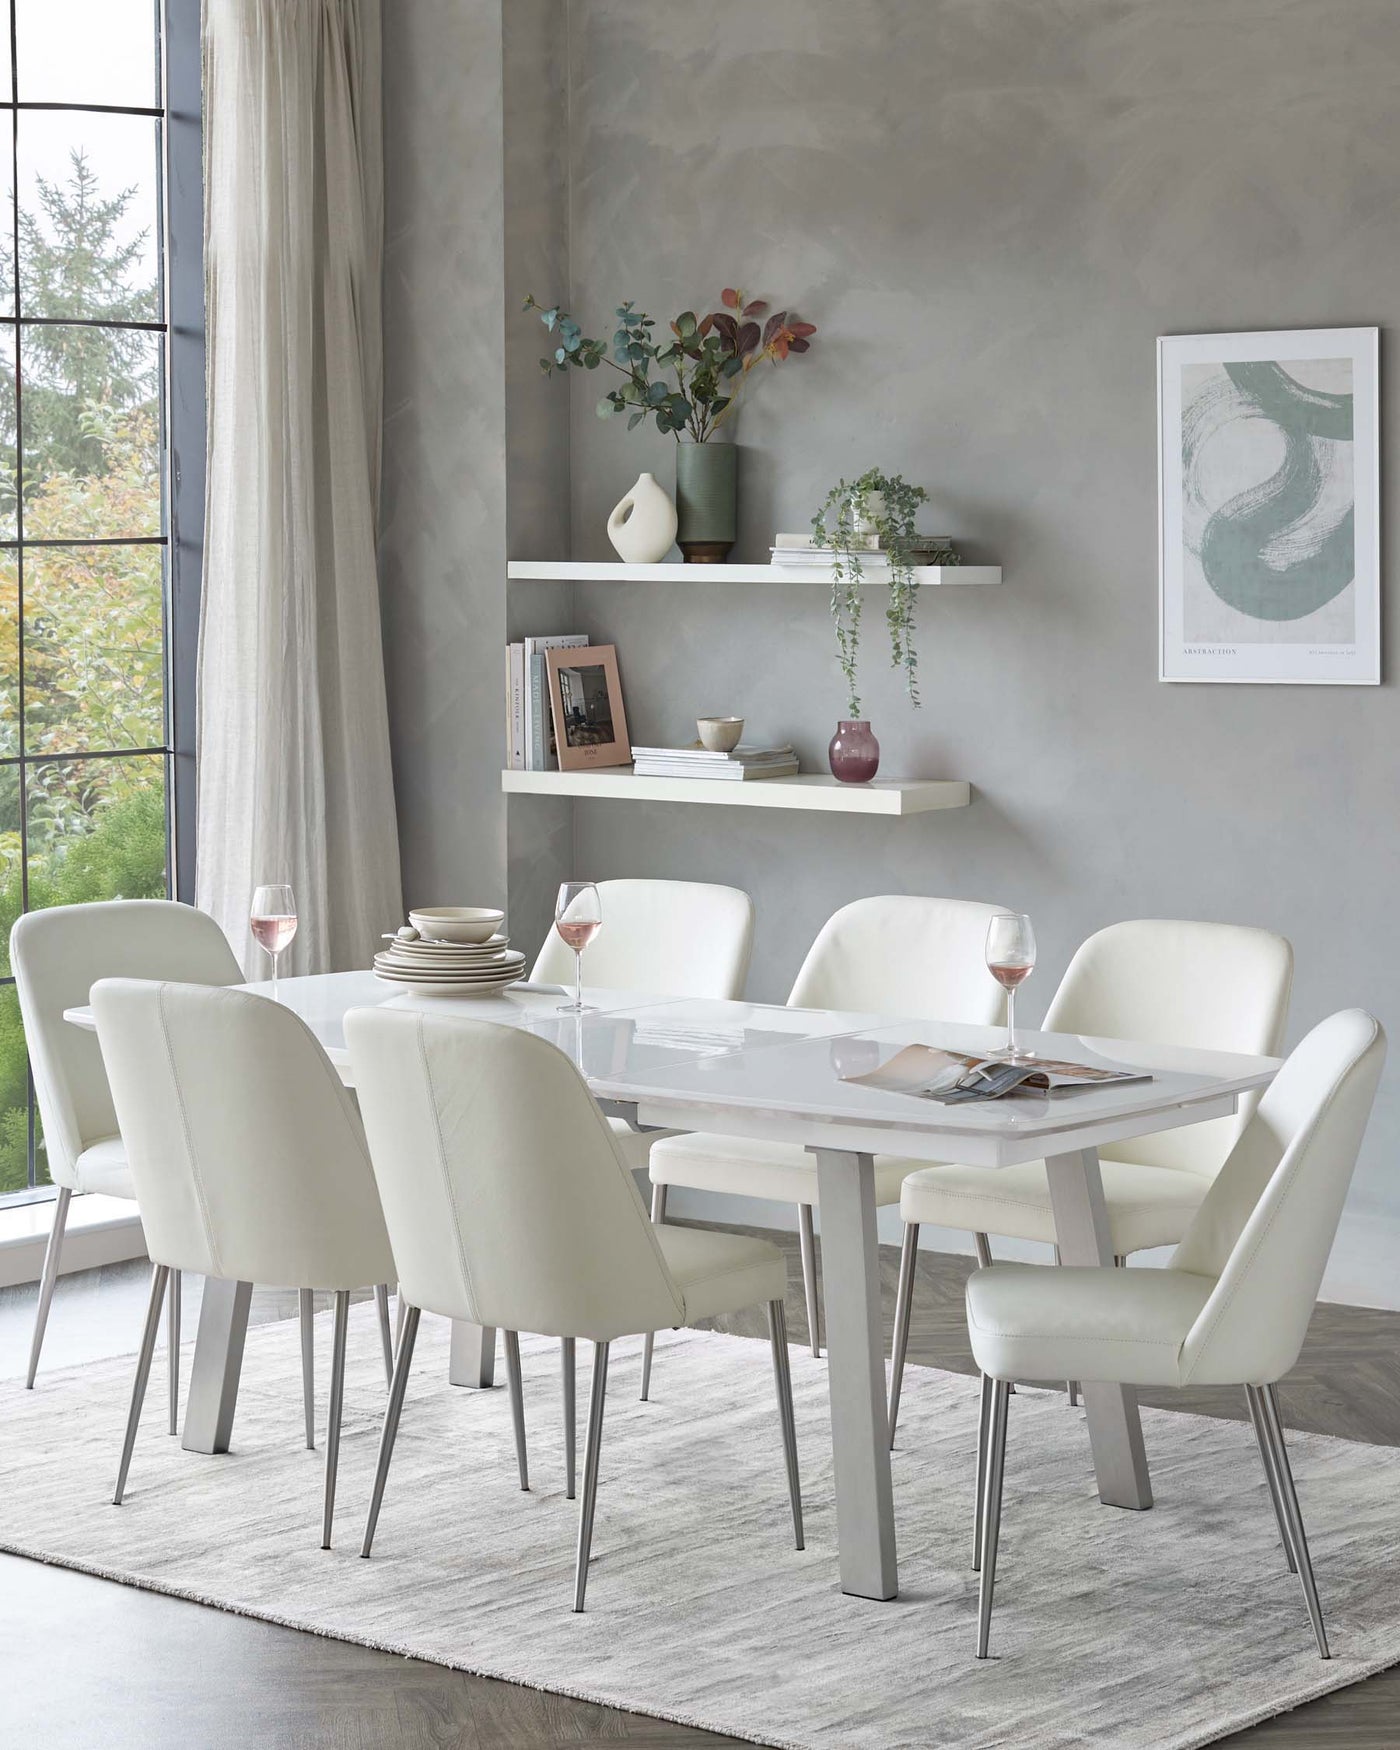 A modern dining room set featuring a rectangular white high-gloss table with silver metal legs, surrounded by six cream upholstered dining chairs with sleek metal legs. The table is partially set with plates and wine glasses. A light grey area rug underlines the set, and a couple of white floating shelves holding decorative items are mounted on the wall behind.